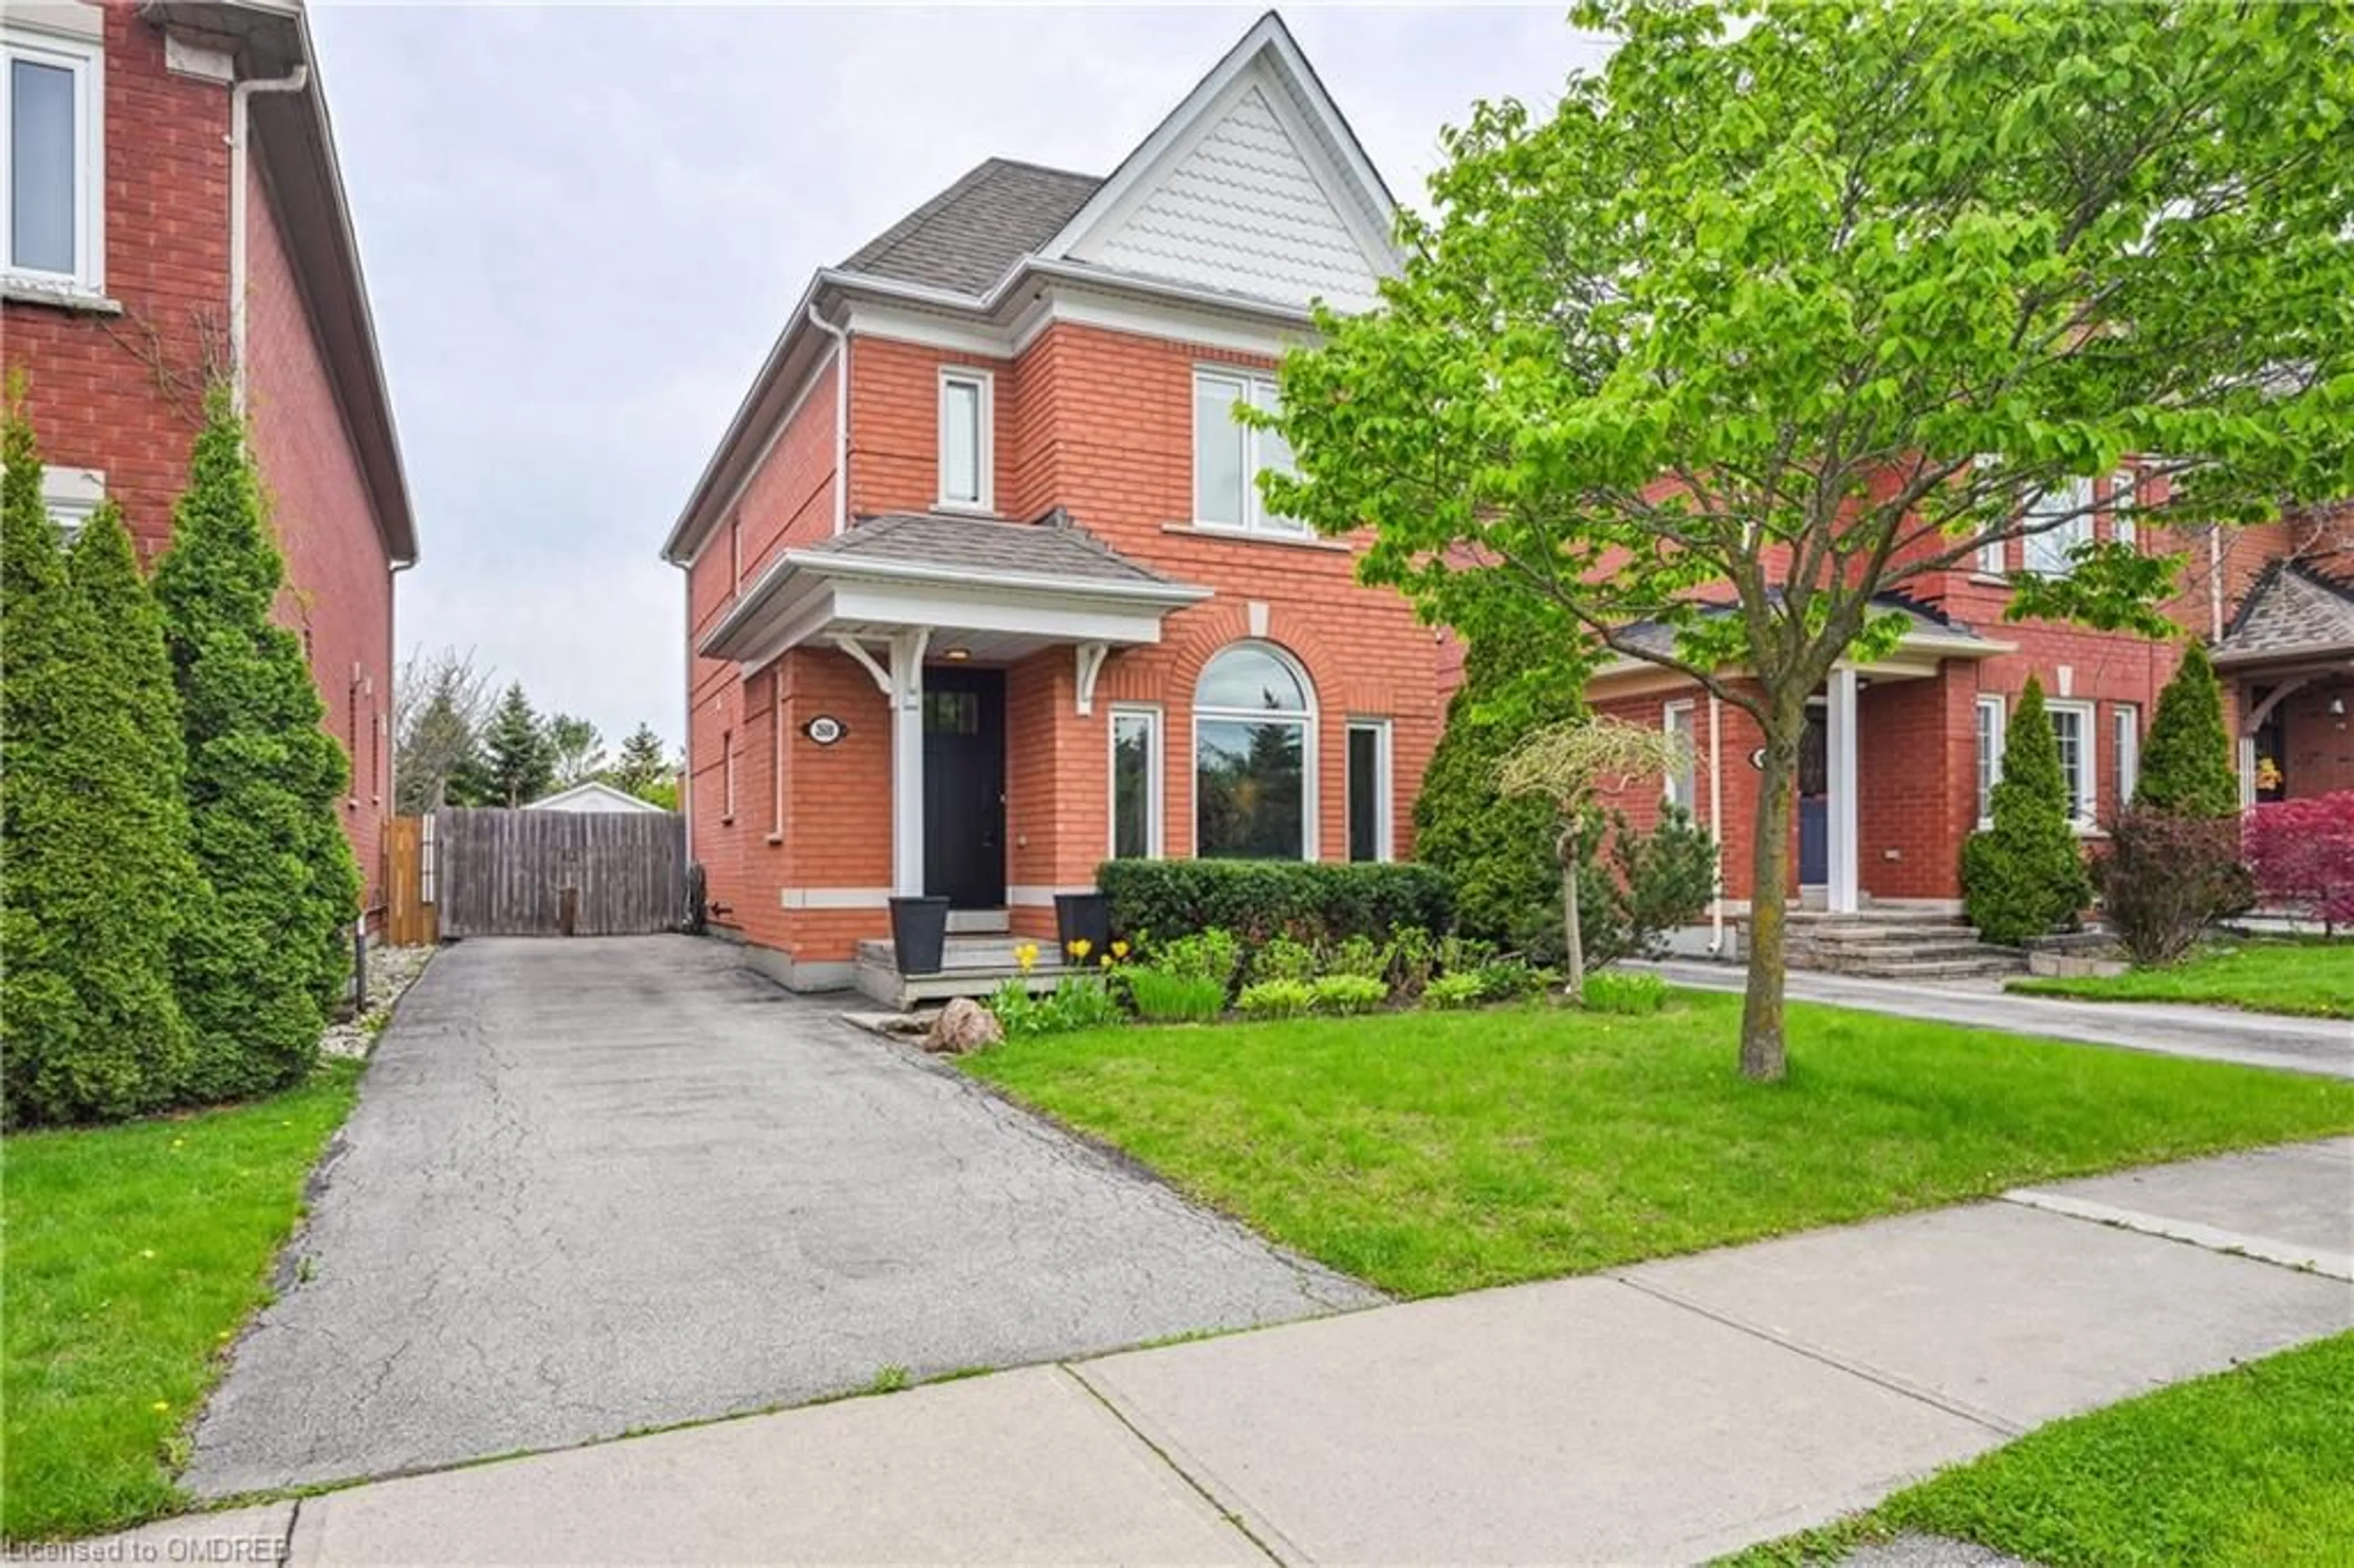 Home with brick exterior material for 2610 Ironwood Cres, Oakville Ontario L6H 6L9